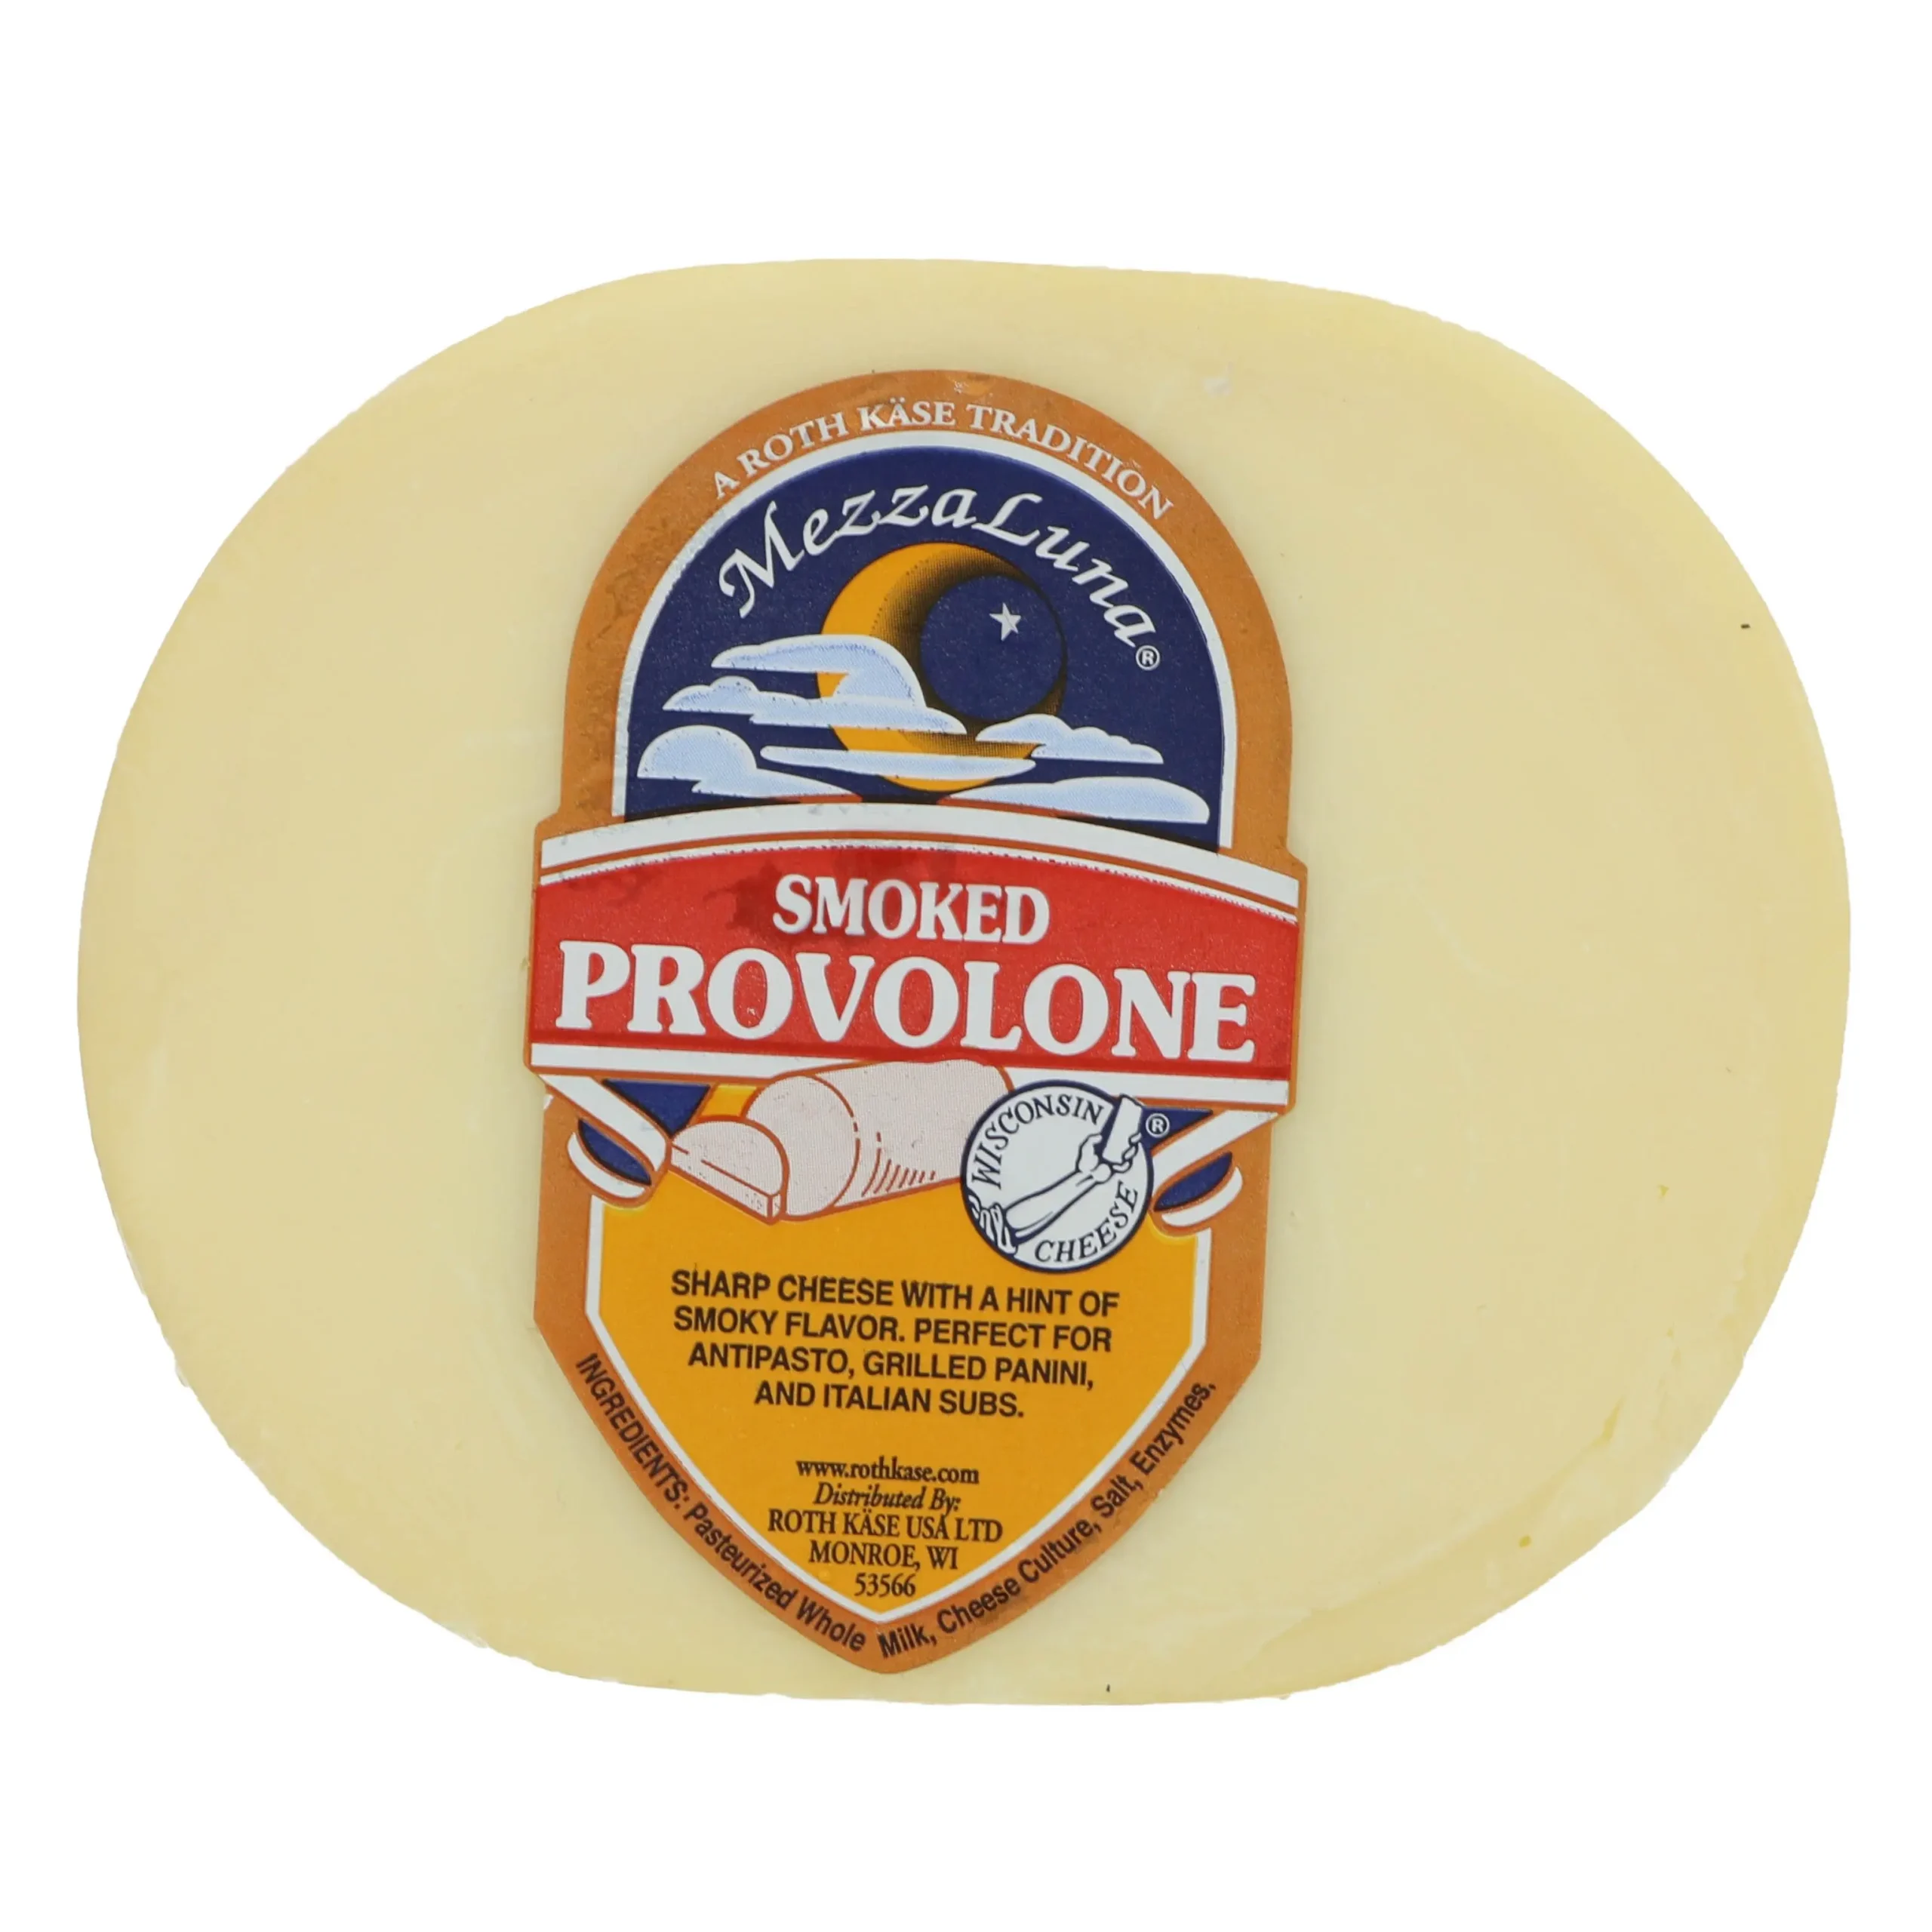 smoked provolone - What kind of cheese is Provolone